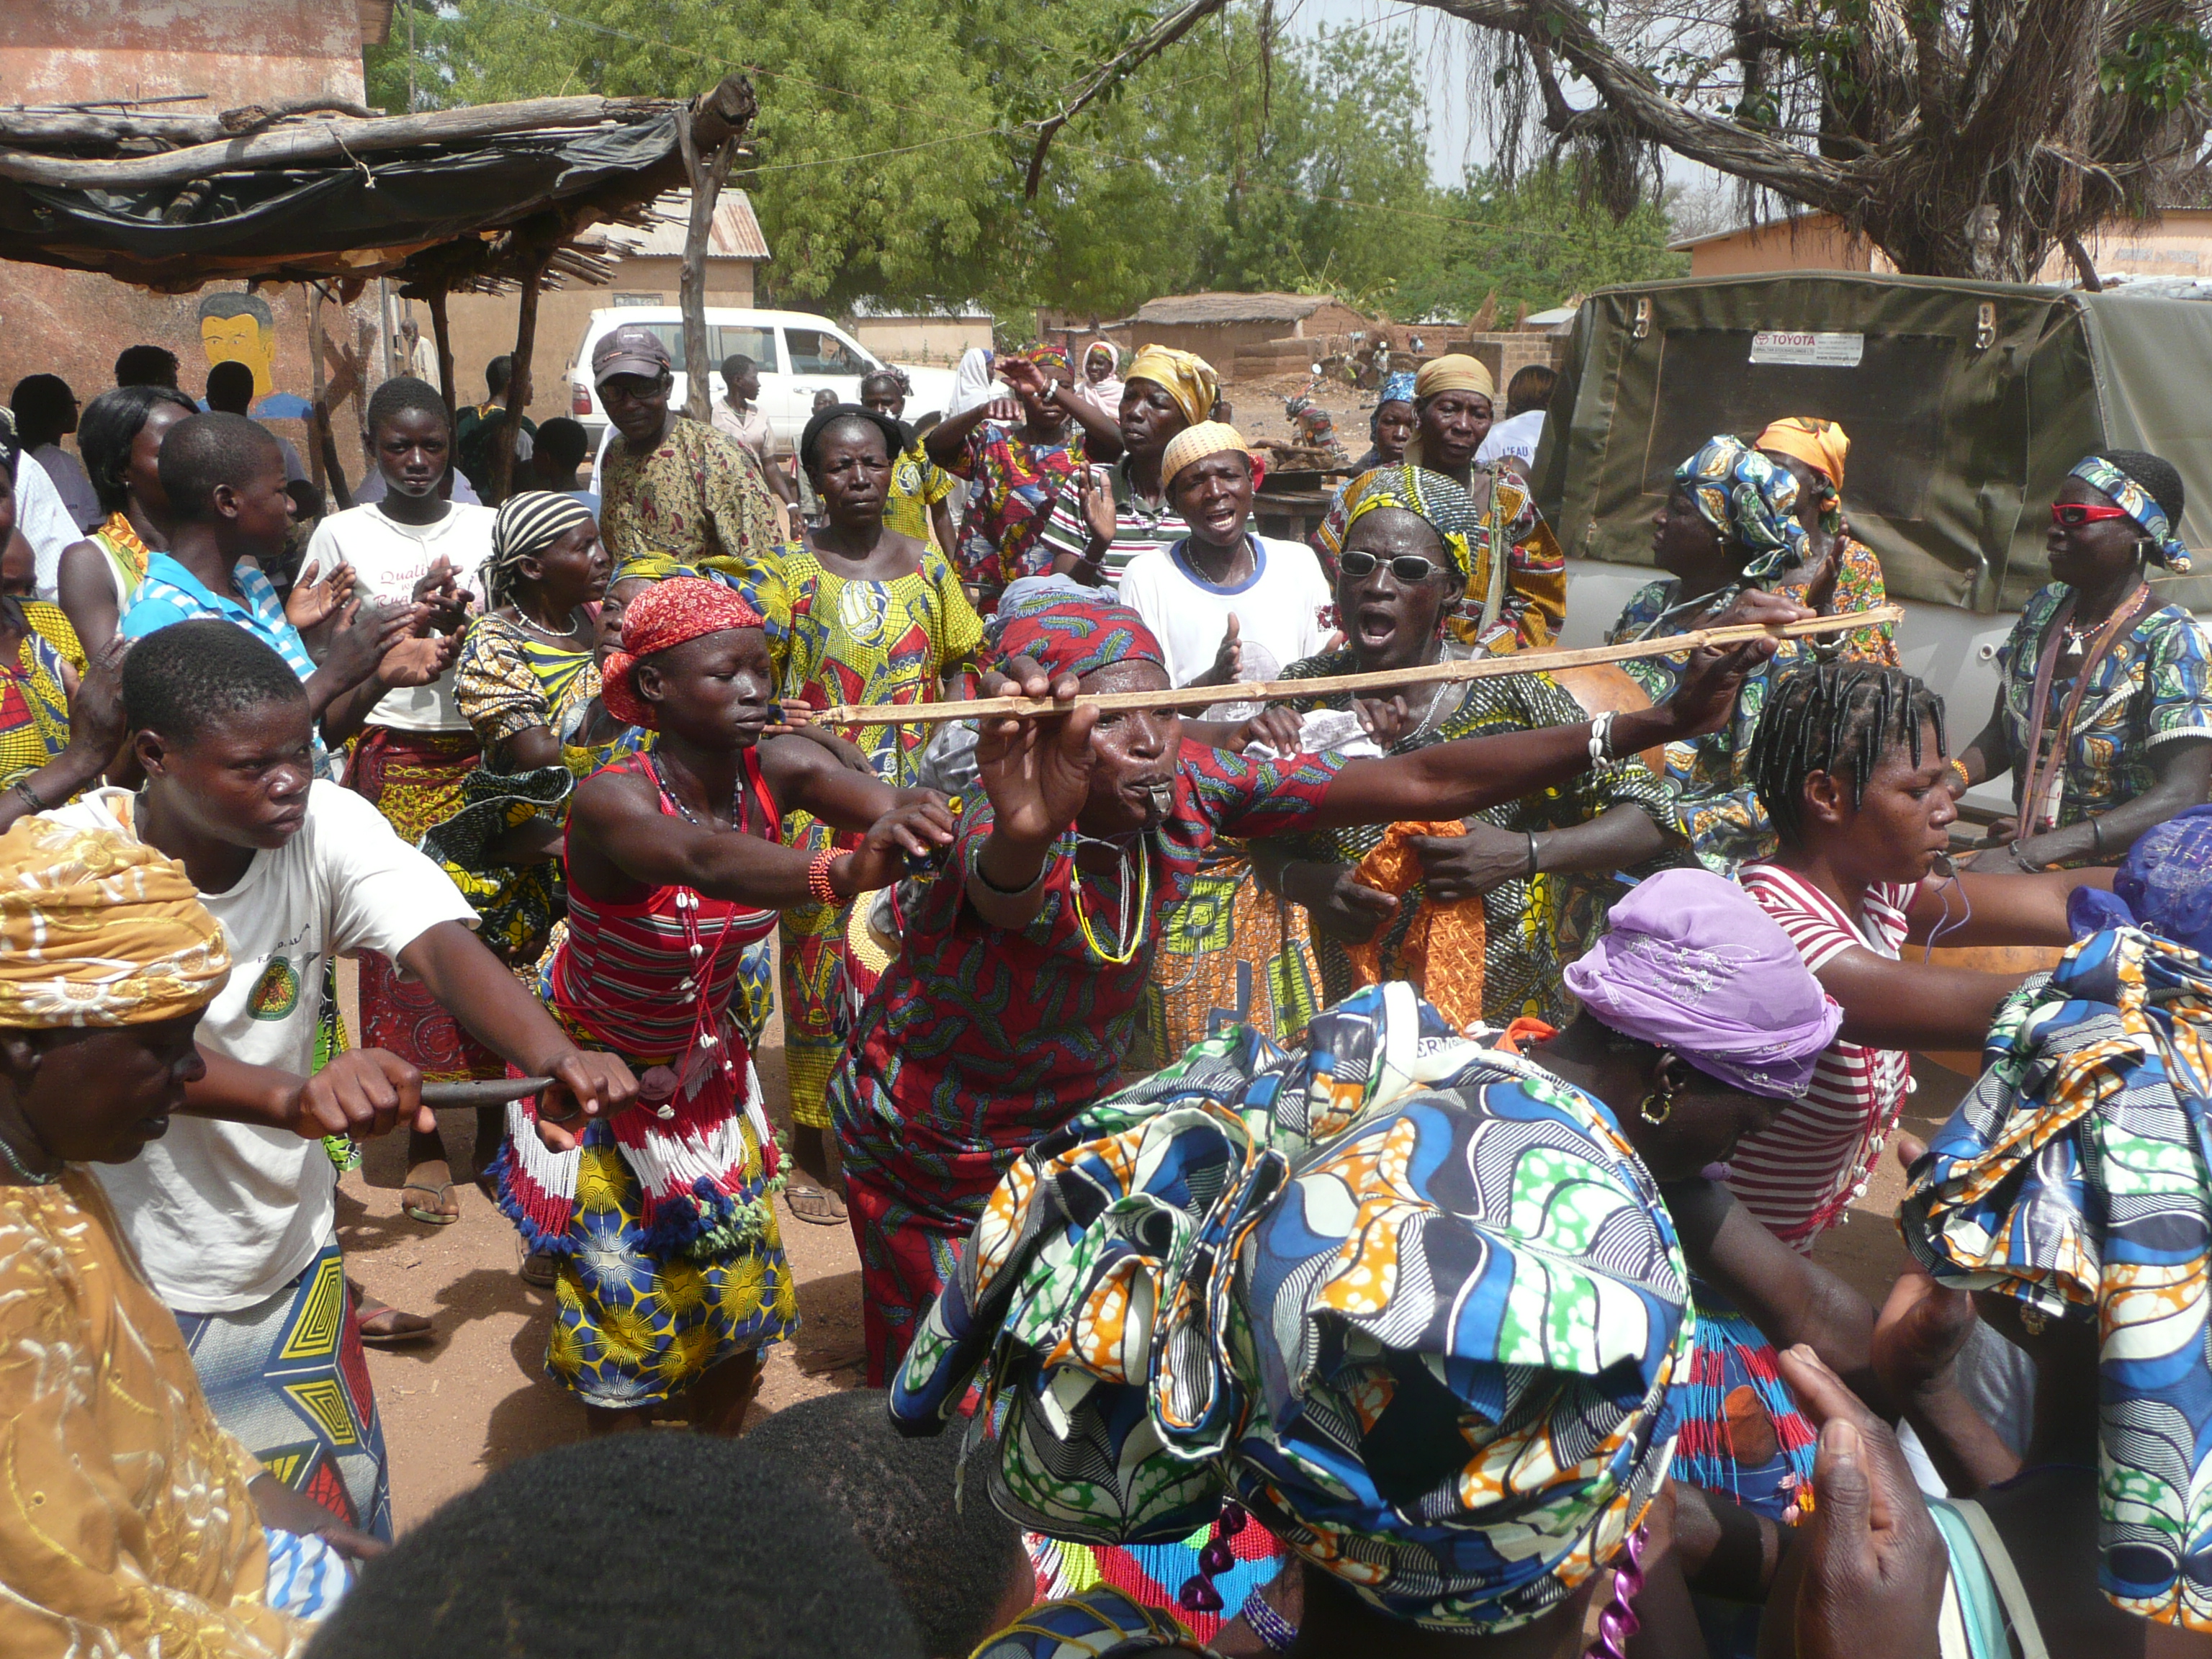 The women of Boukoumbe like to move it move it.